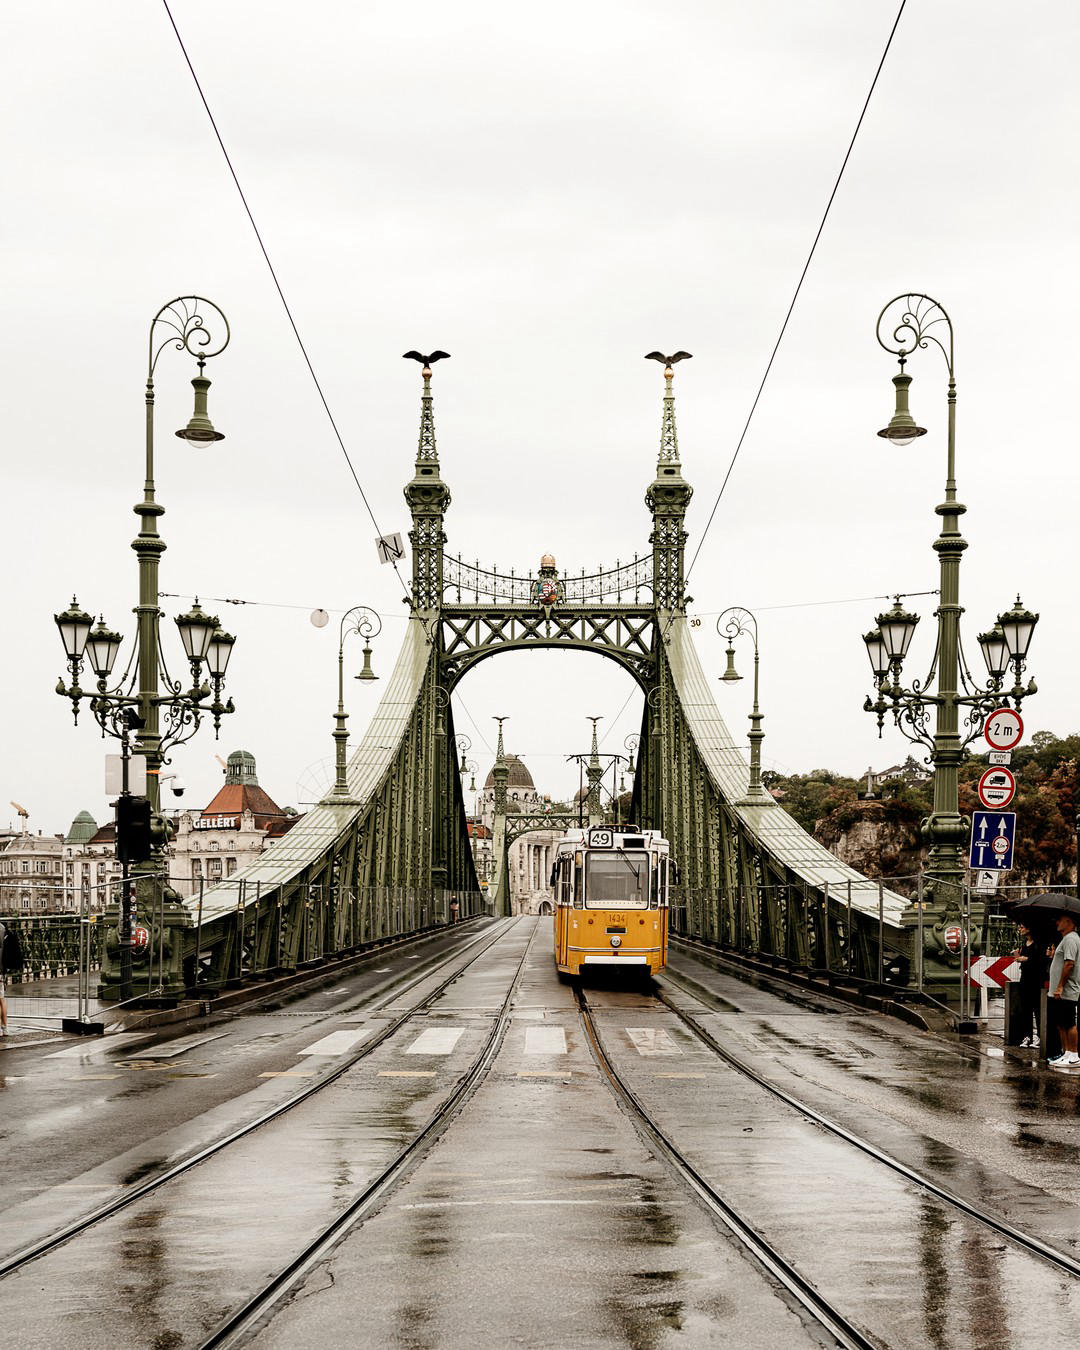 Jacintha Verdegaal - The famous 'chain bridge' in Budapest is unfortunately closed for renovation, b